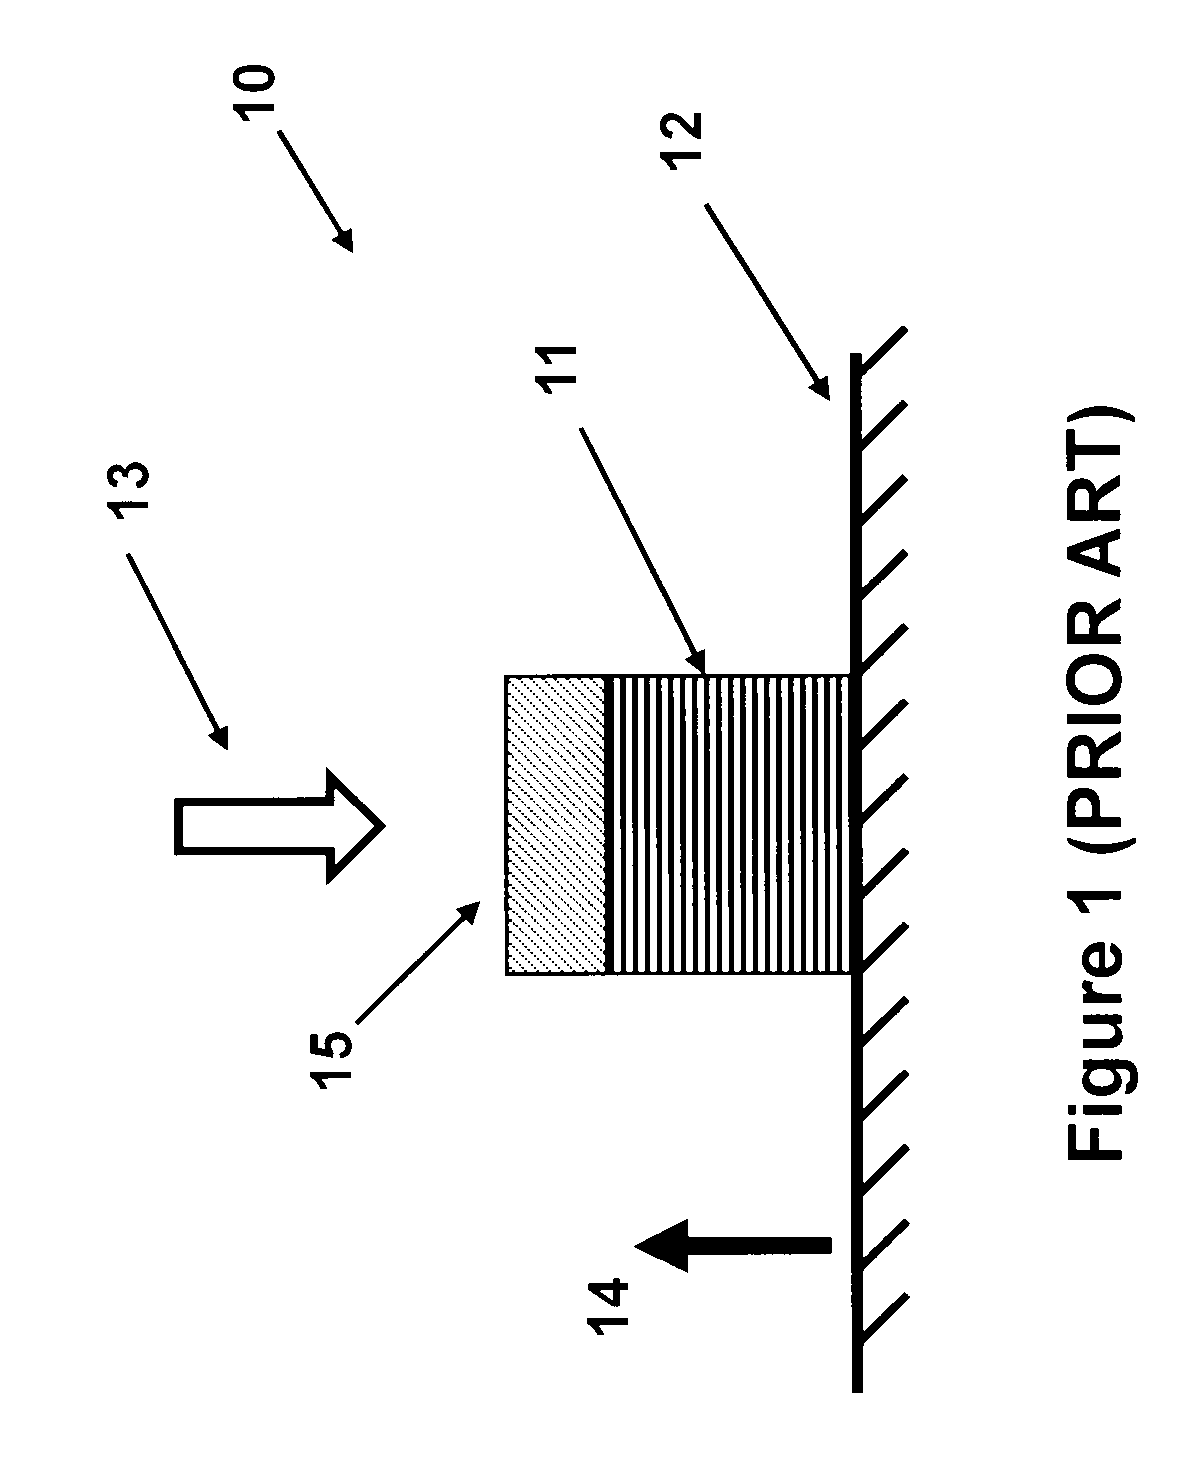 Piezoelectric Generators Having an Inductance Circuit For Munitions Fuzing and the Like